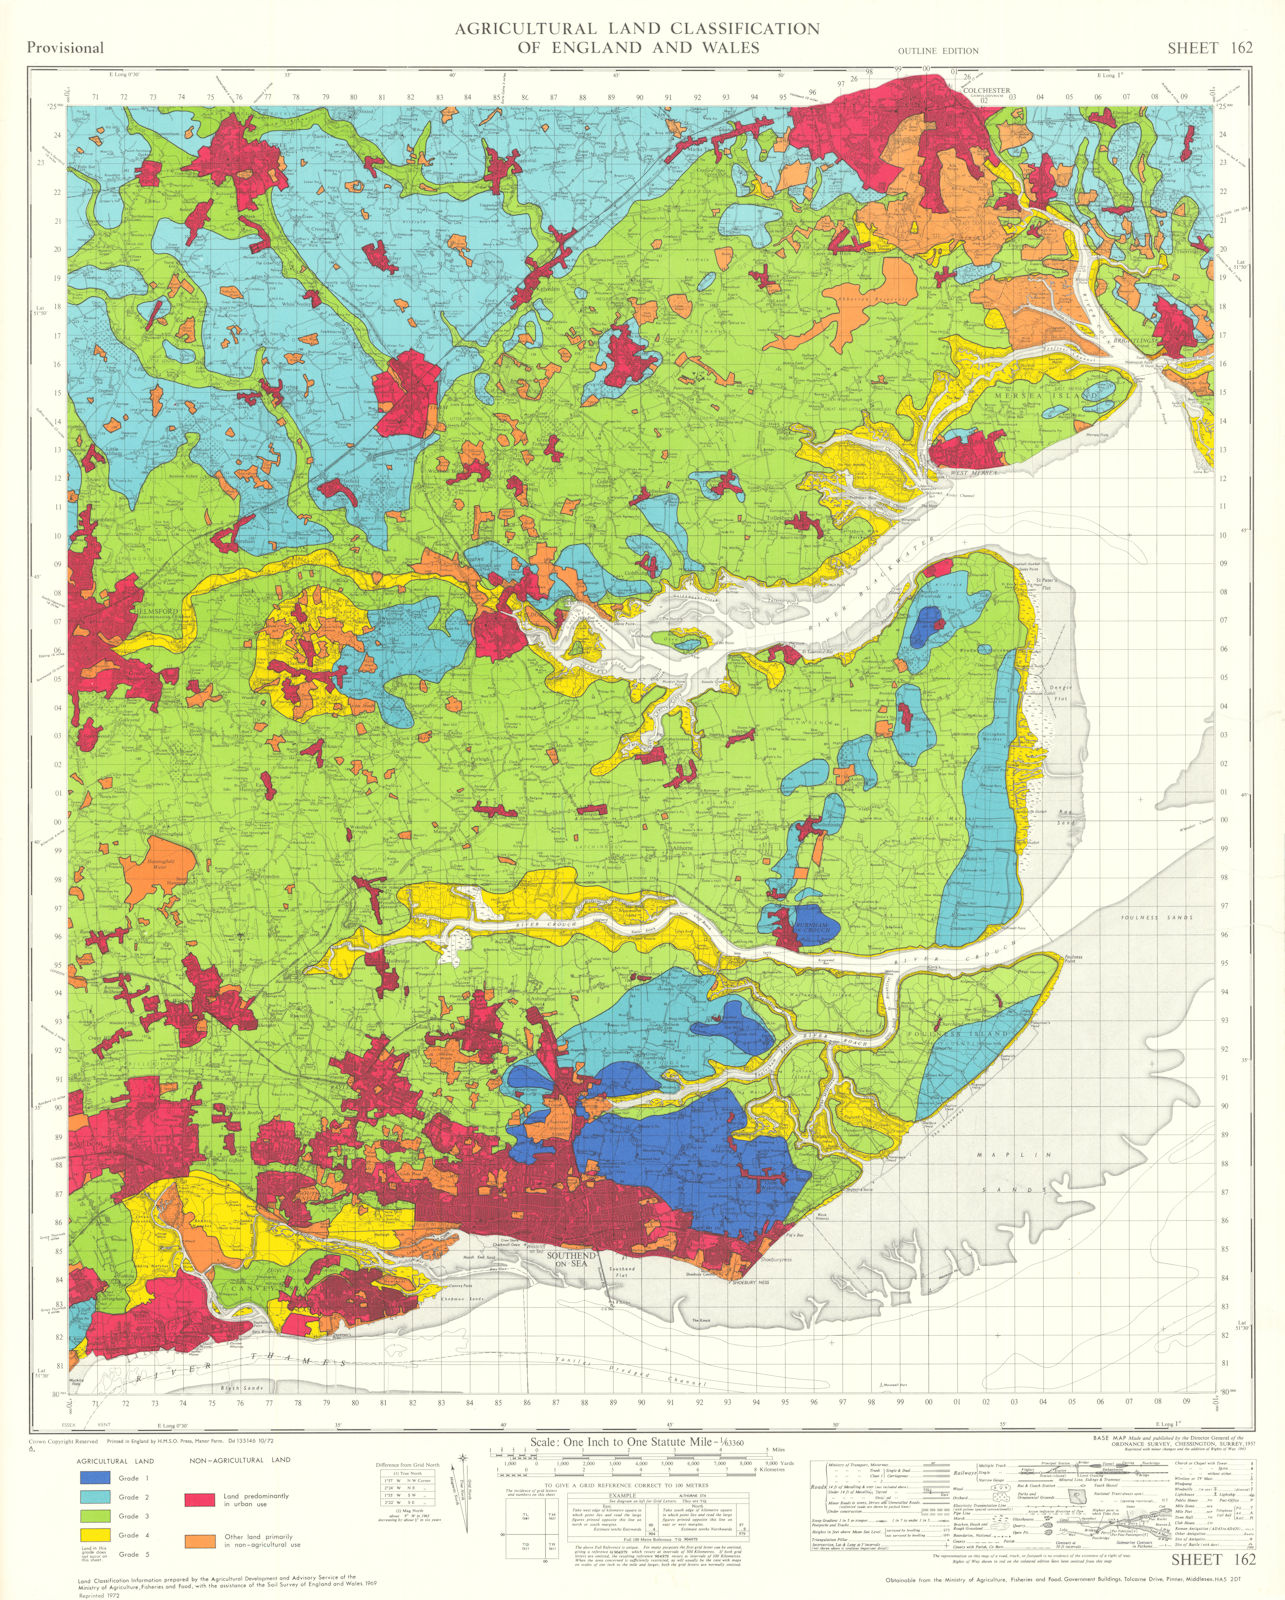 Agricultural Land Classification 162 North Thames Estuary & Basin Essex 1972 map